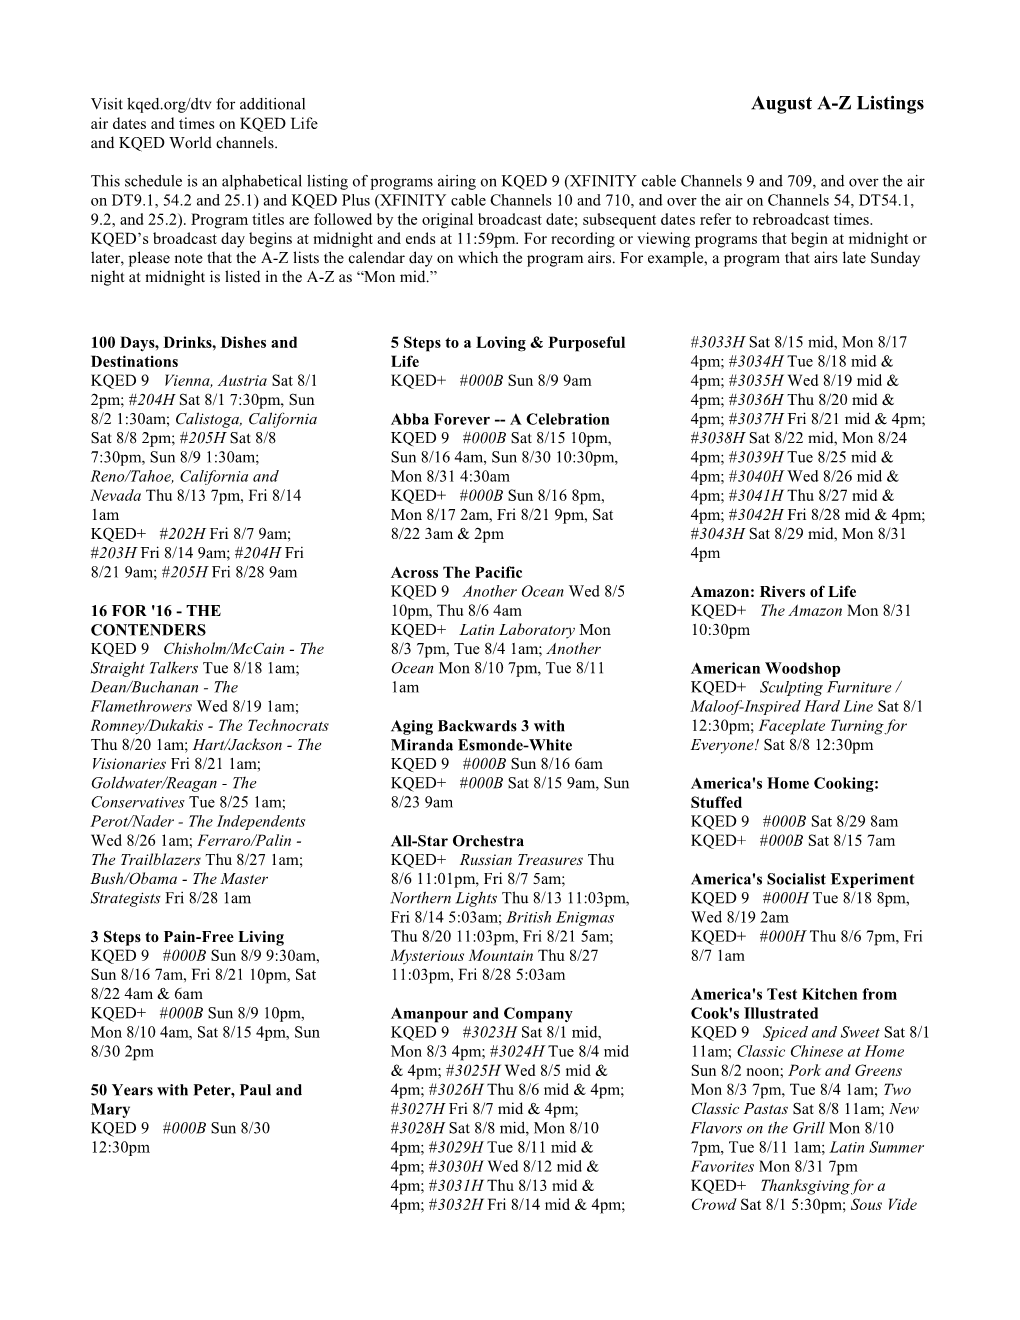 August A-Z Listings Air Dates and Times on KQED Life and KQED World Channels